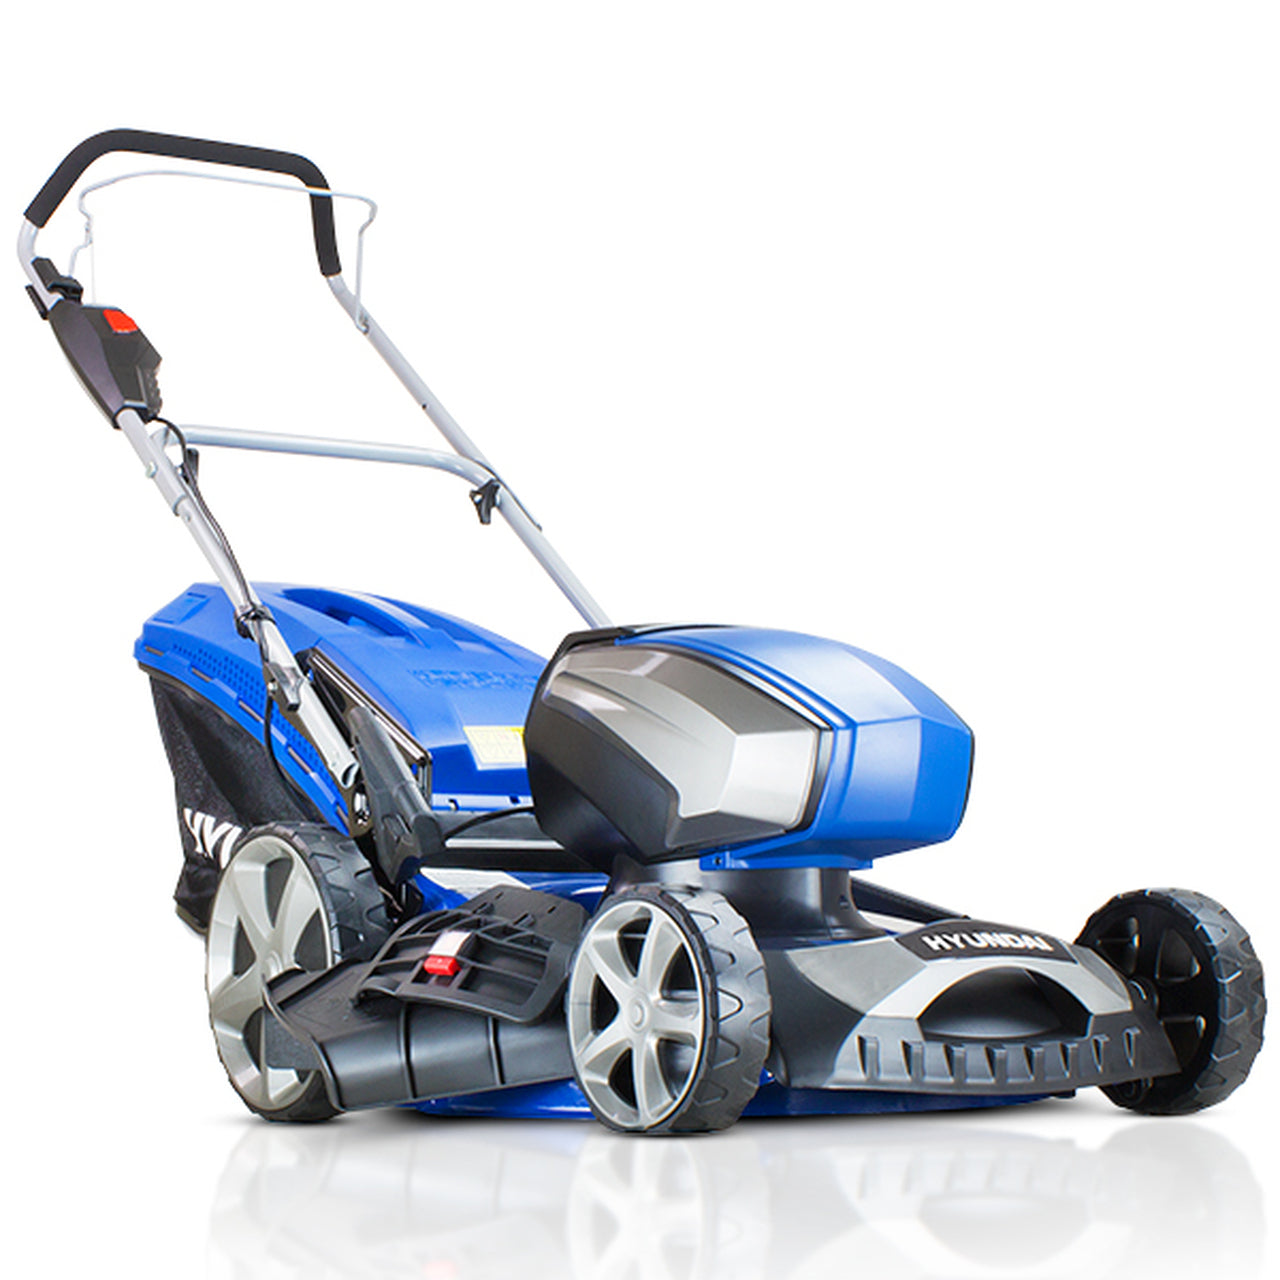 Hyundai-HYM80LI460P-80V-Lithium-Ion-Cordless-Battery-Powered-Lawn-Mower-&-Battery-and-Charger